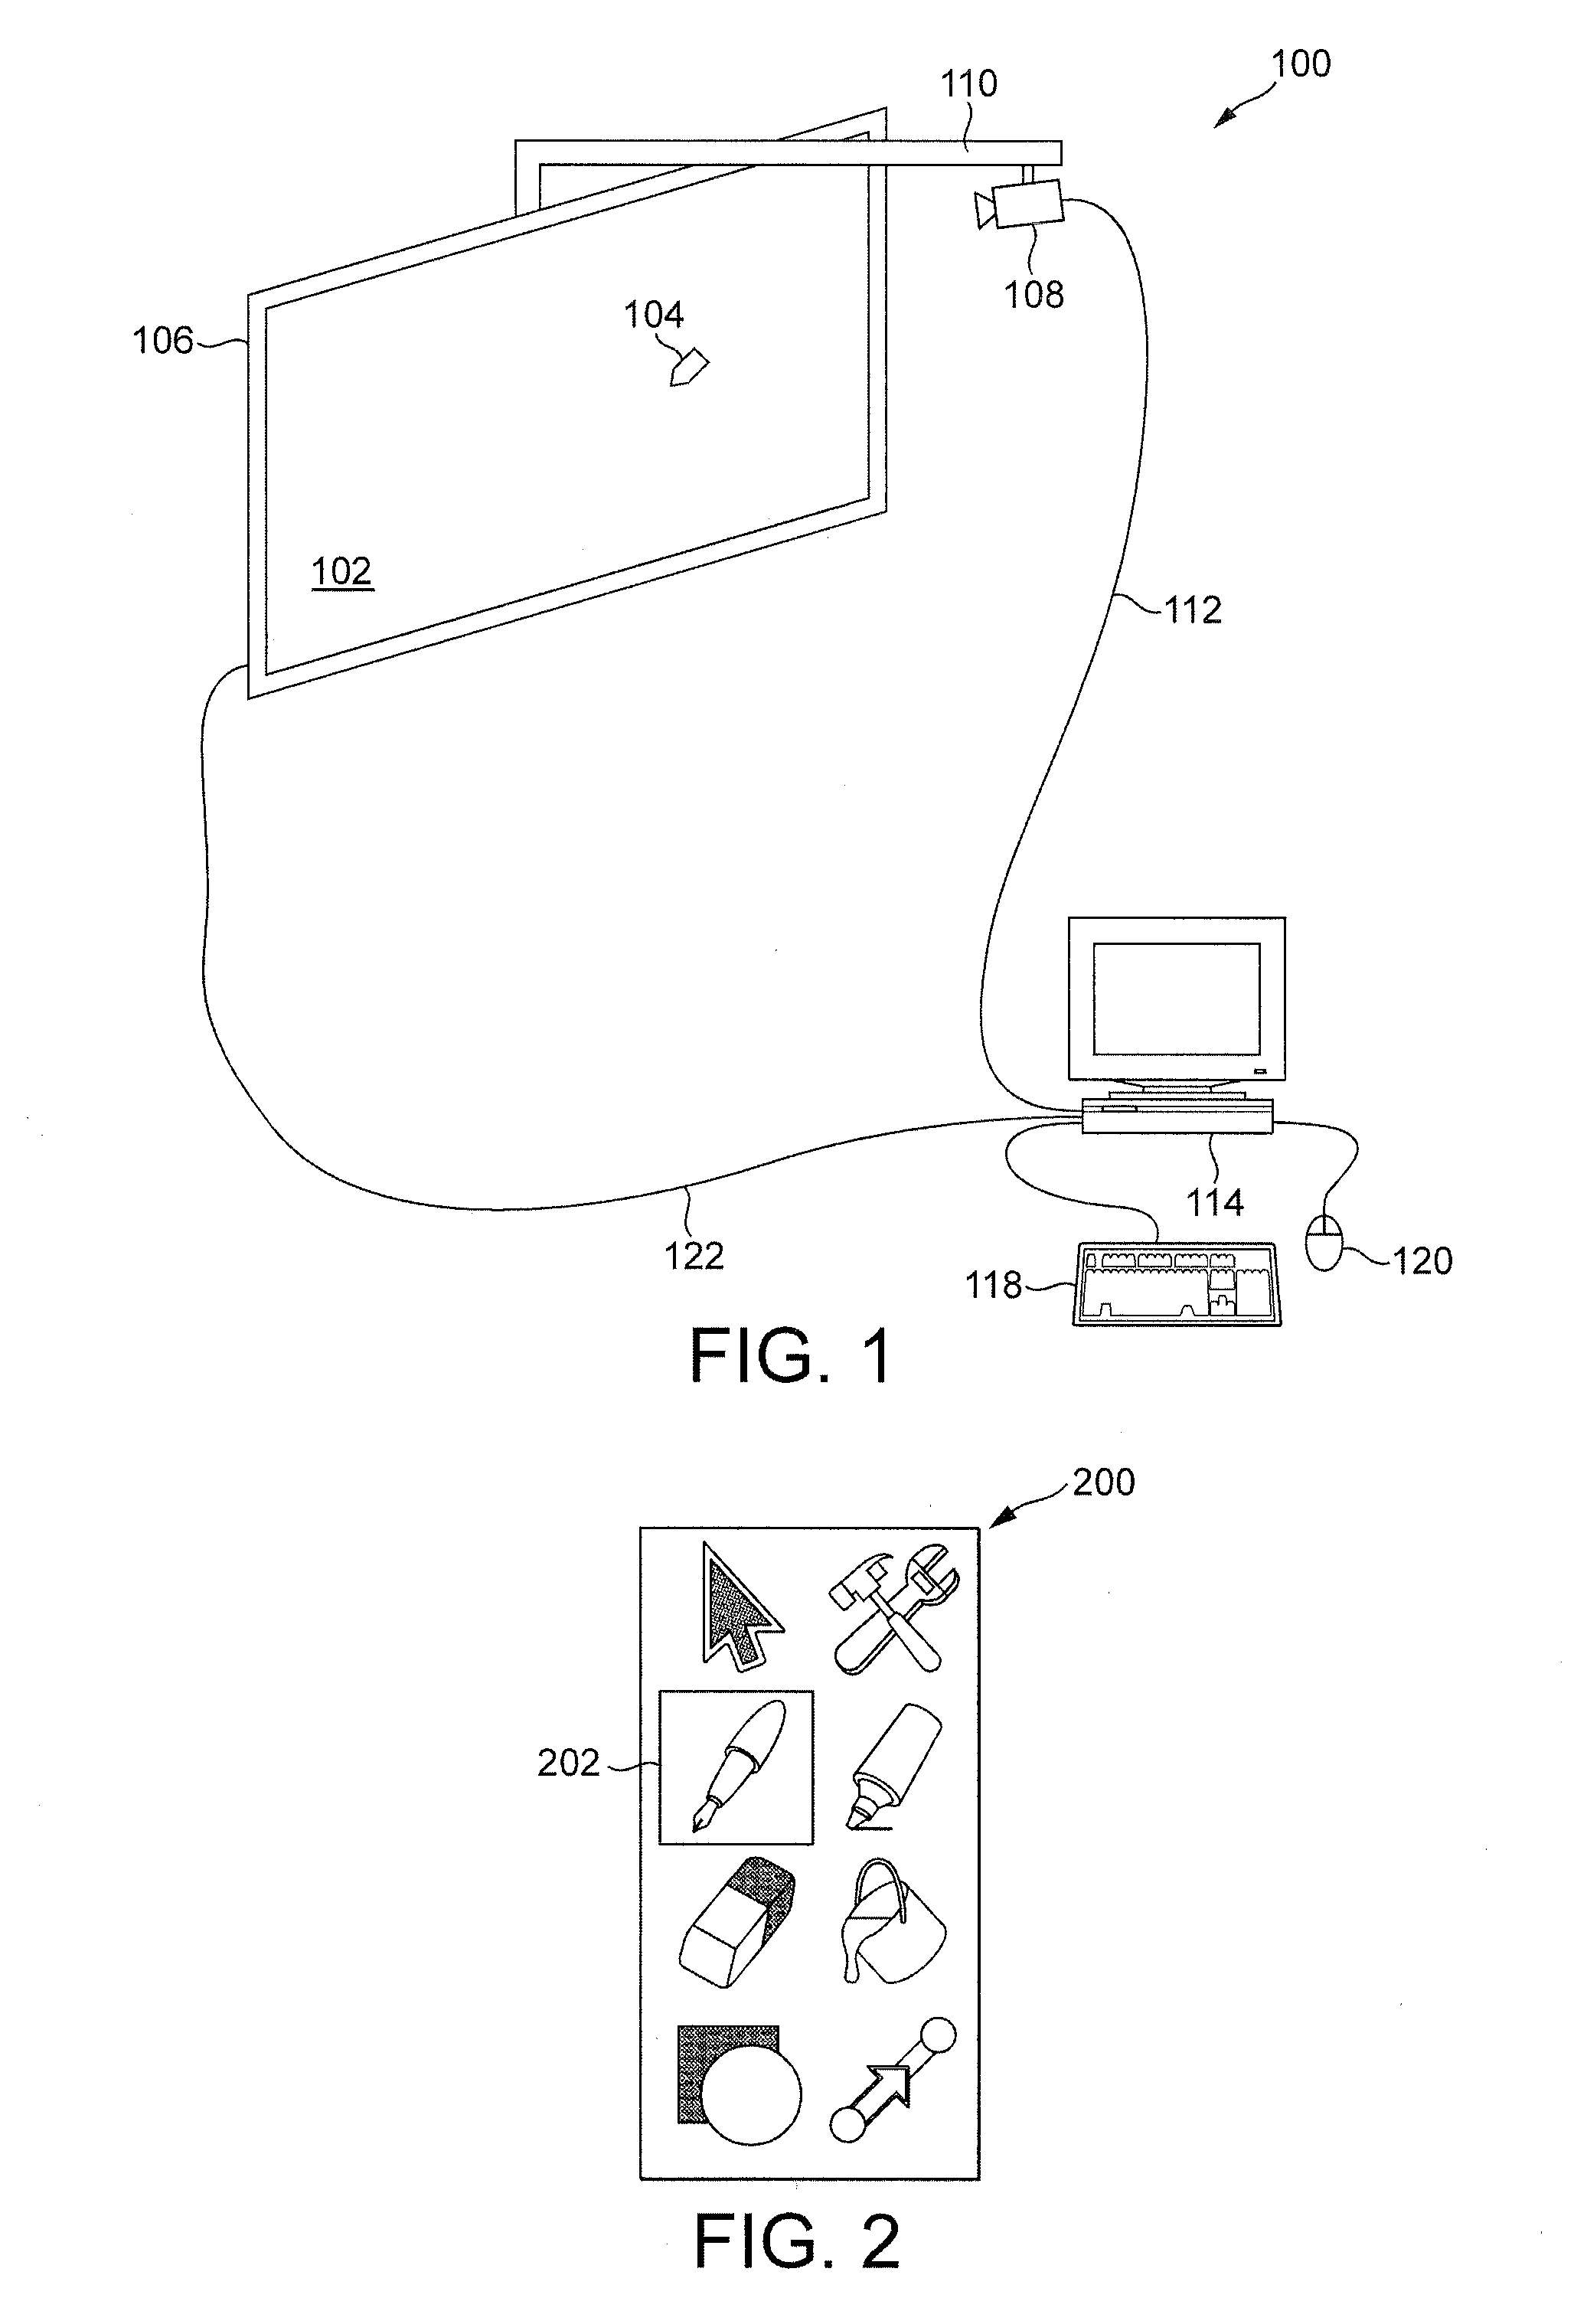 Display with shared control panel for different input sources